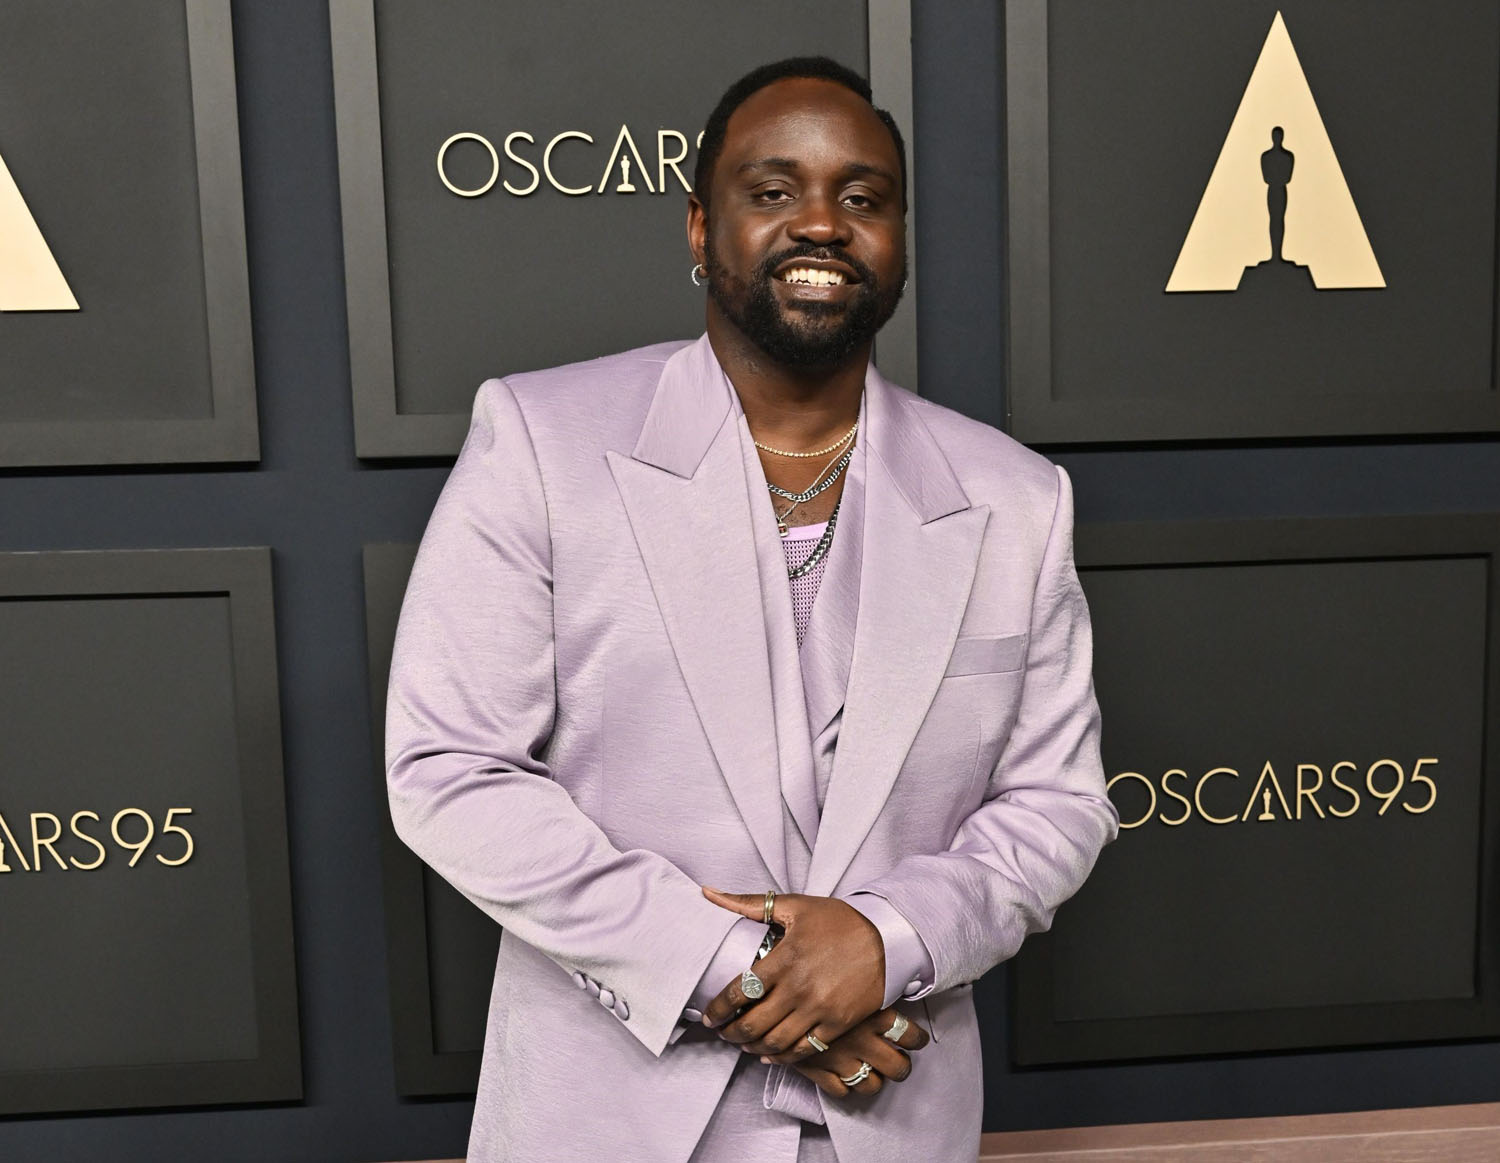 Best Supporting Actor Oscar nominee Brian Tyree Henry will definitely